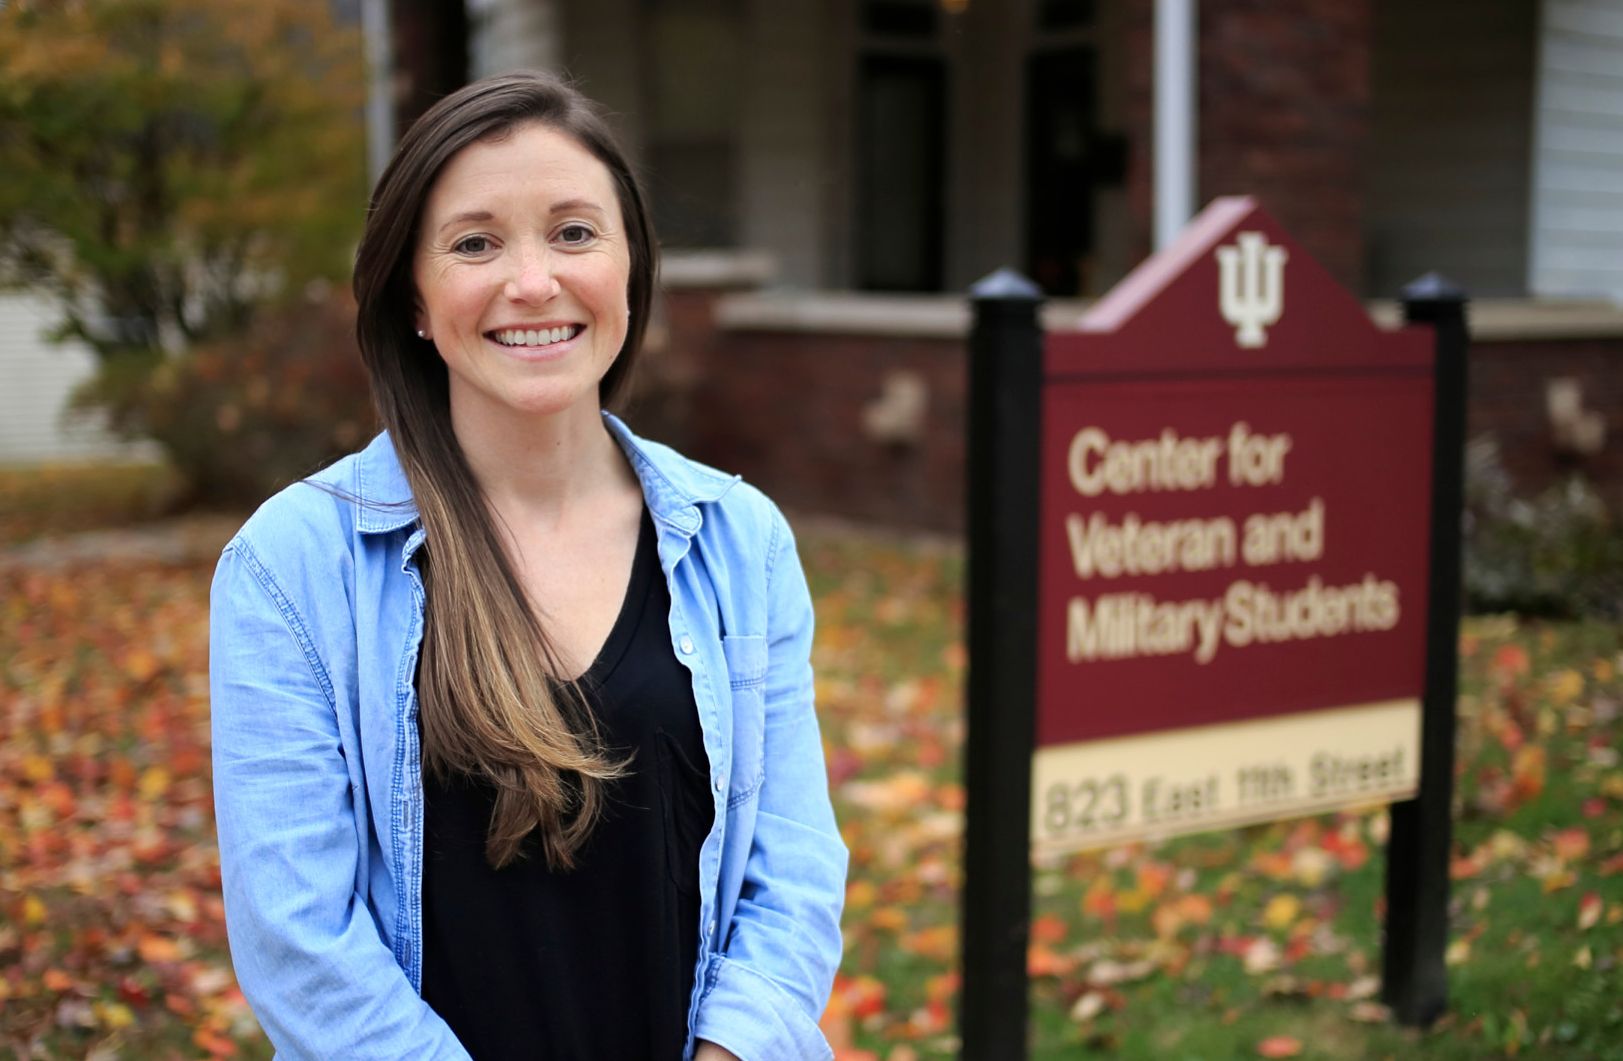 Sarah Bassett stands in front of the Center for Veteran and Military Students